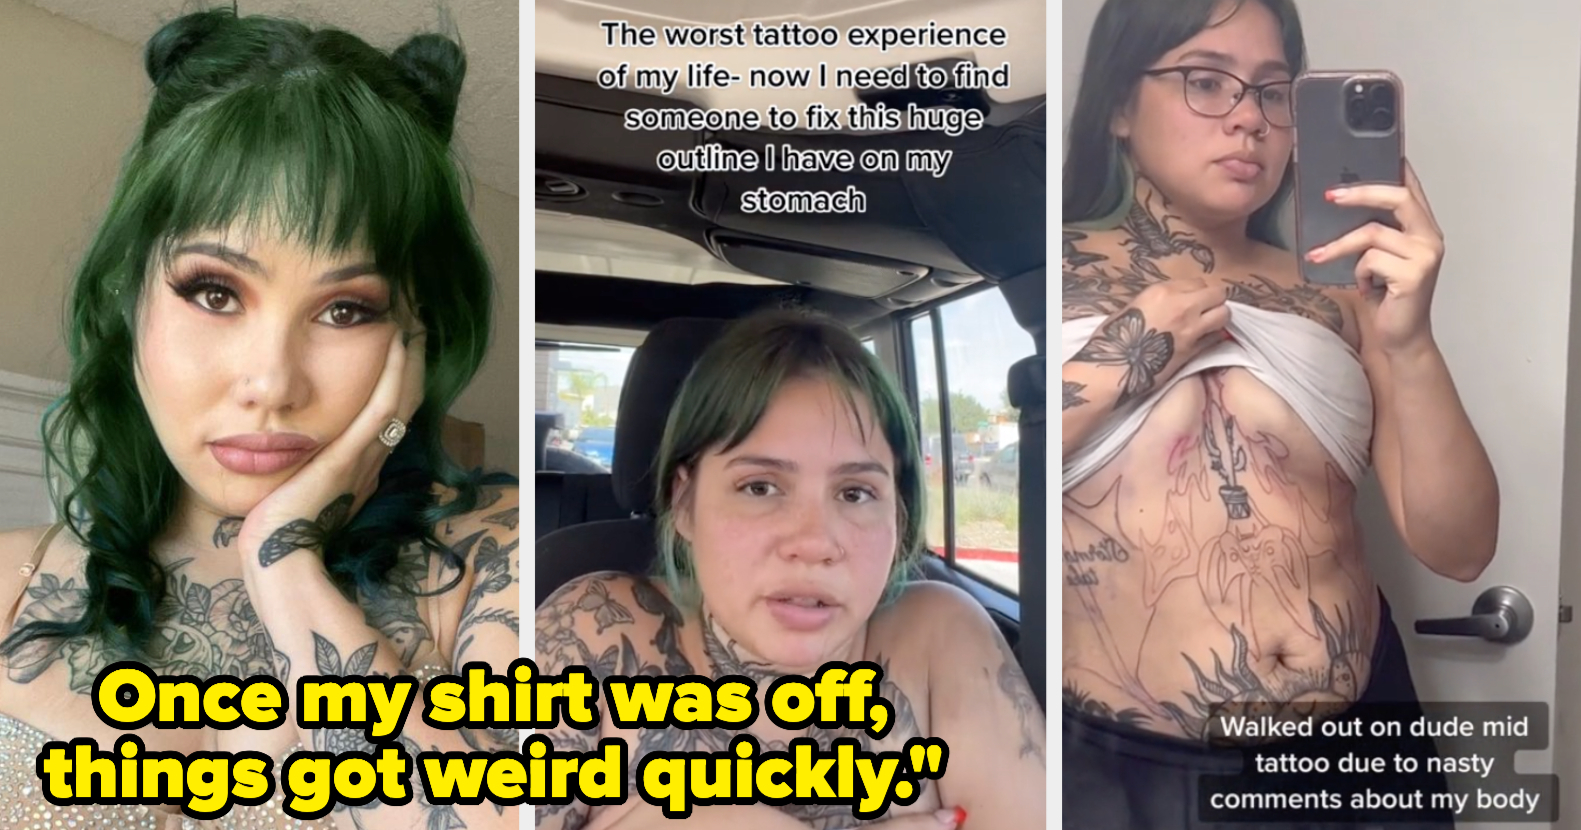 Man Body Shames Woman While Giving Her A Tattoo